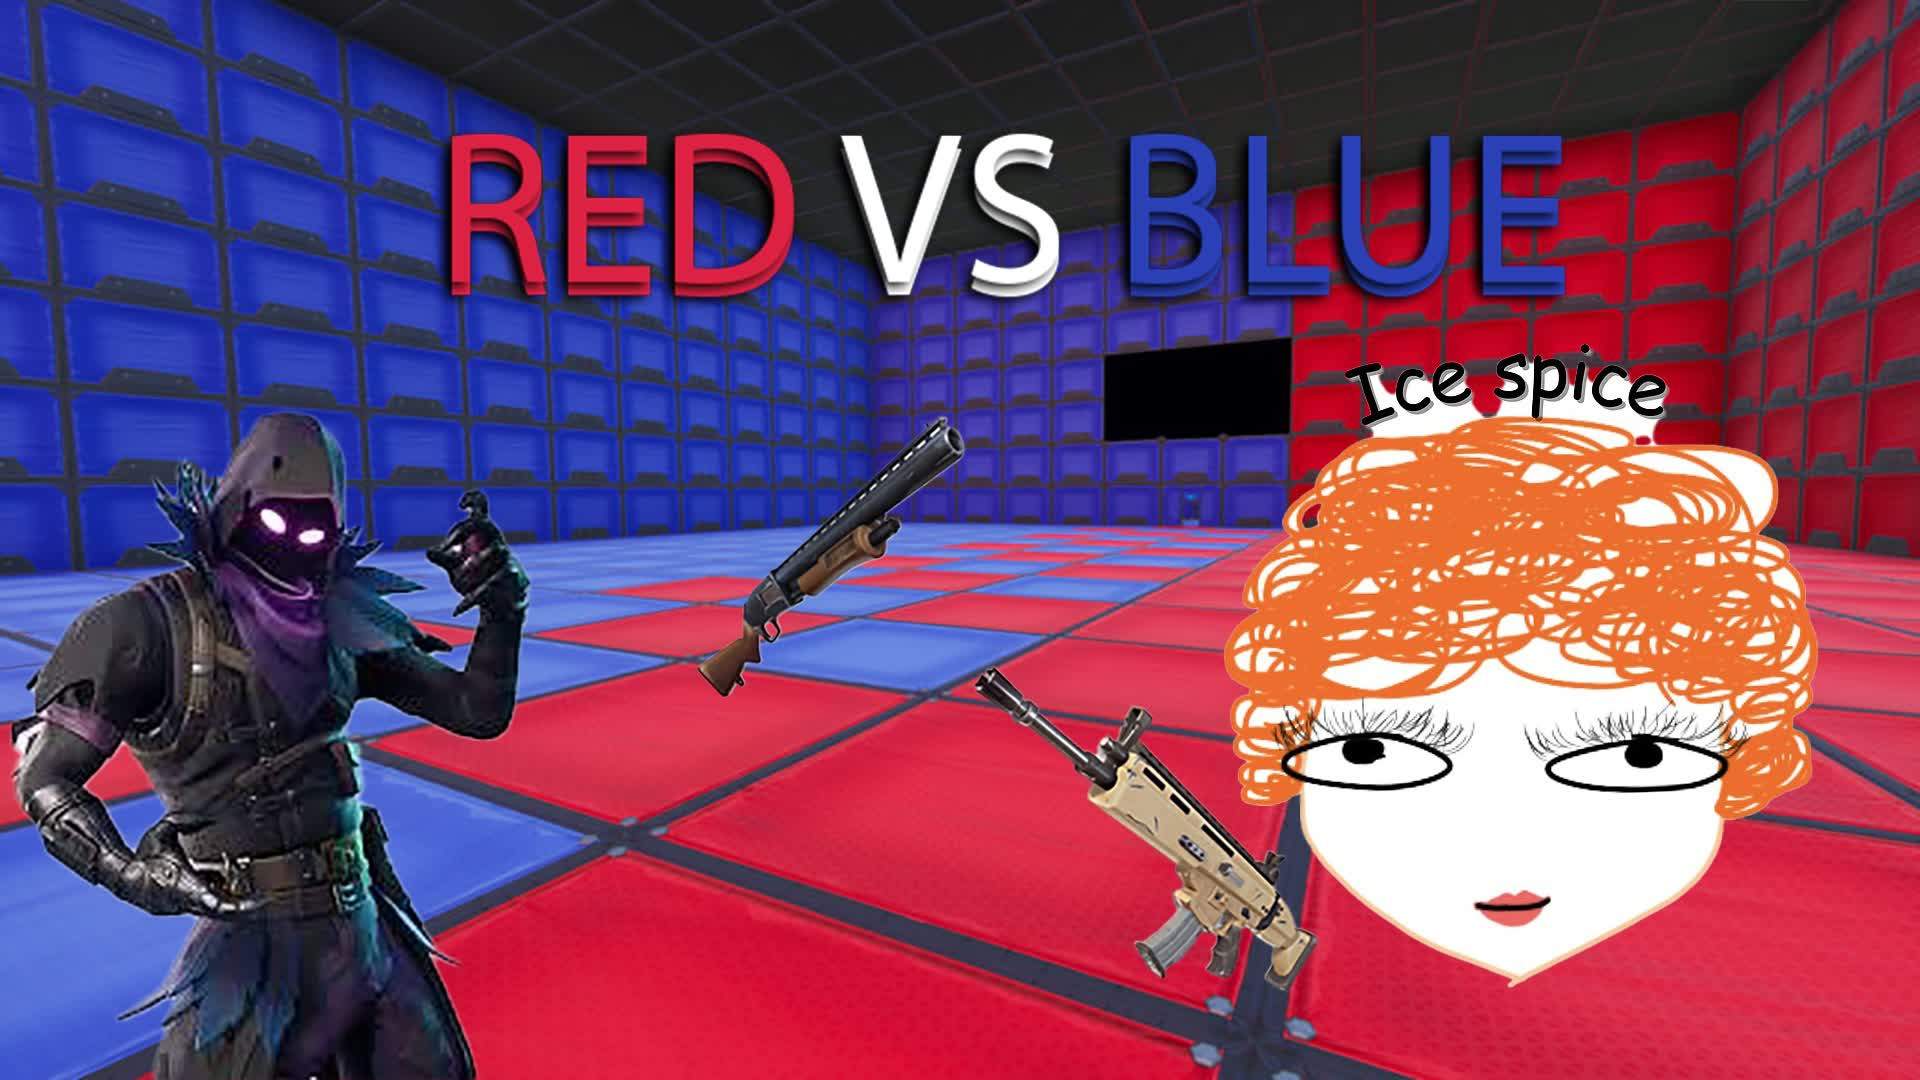 Ice Spice Red Vs Blue